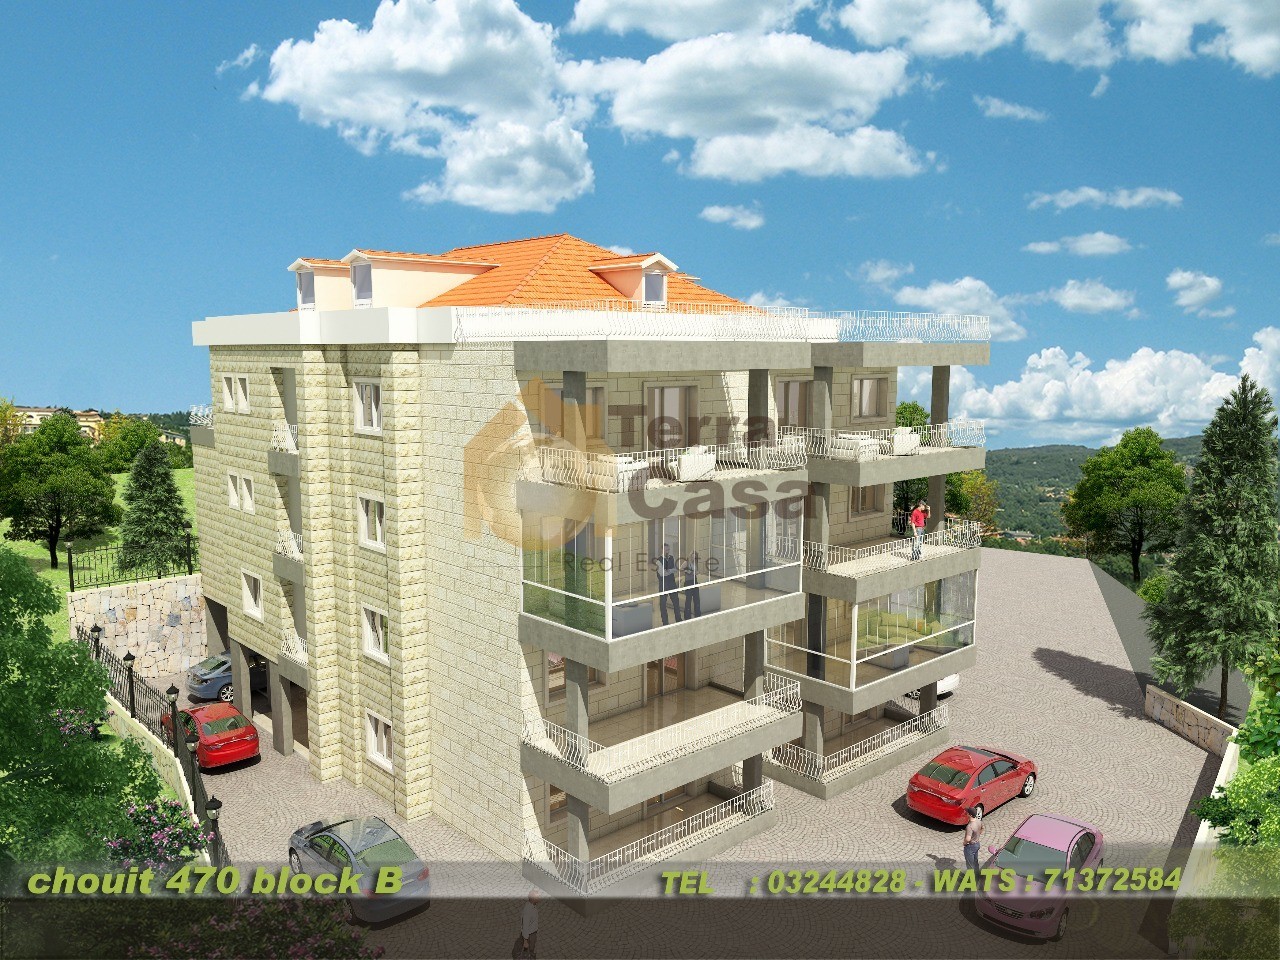 Apartment in Schweet brand new with terrace panoramic sea view.